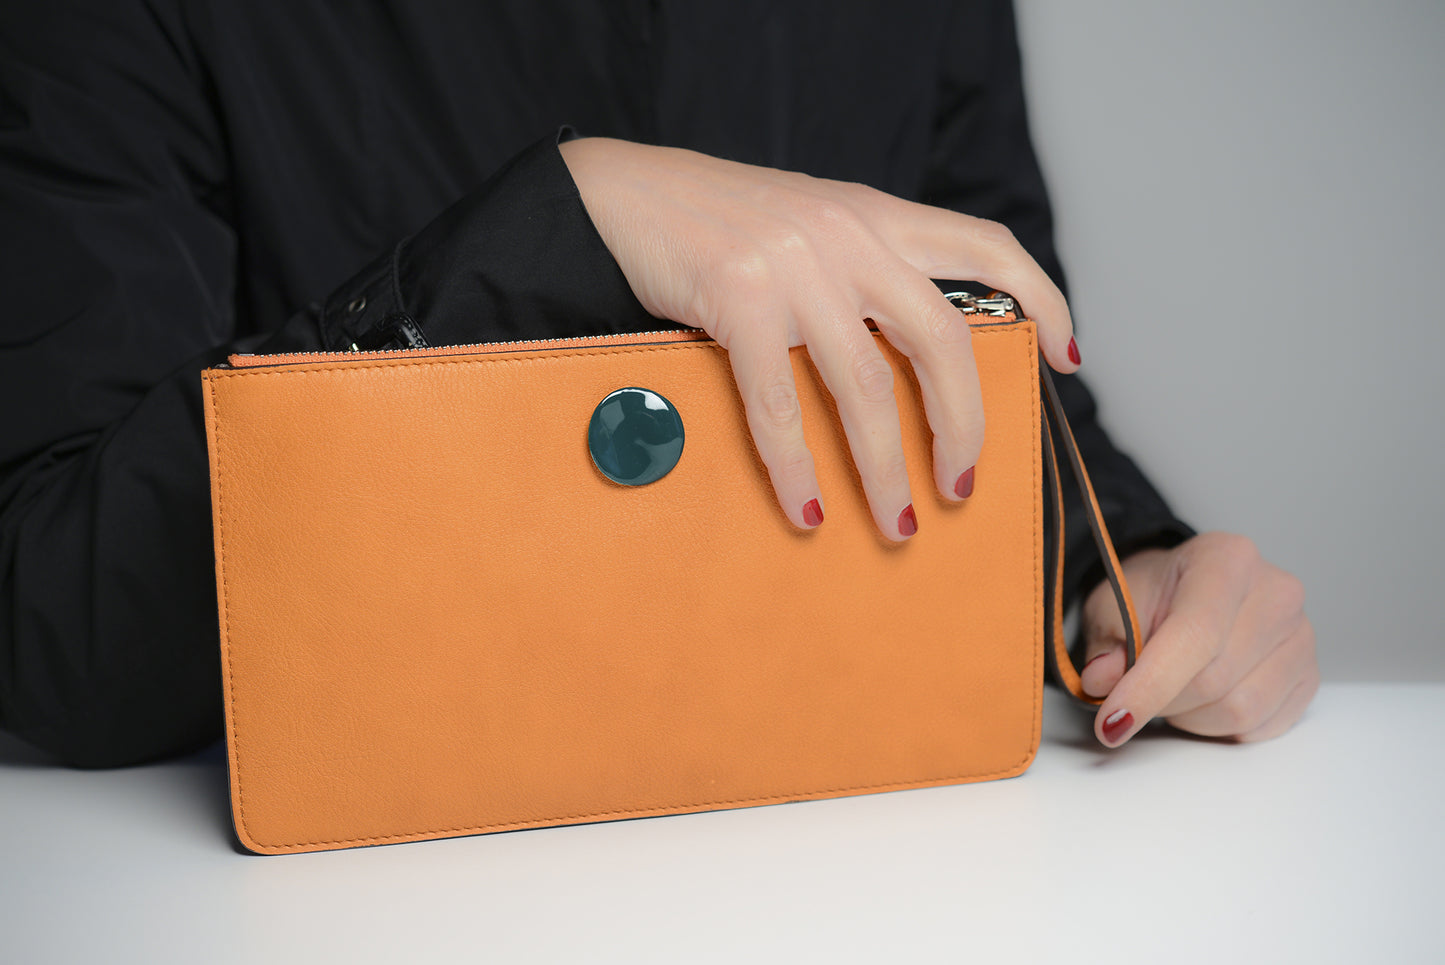 Clutch bag in orange leather with enameled silver detail